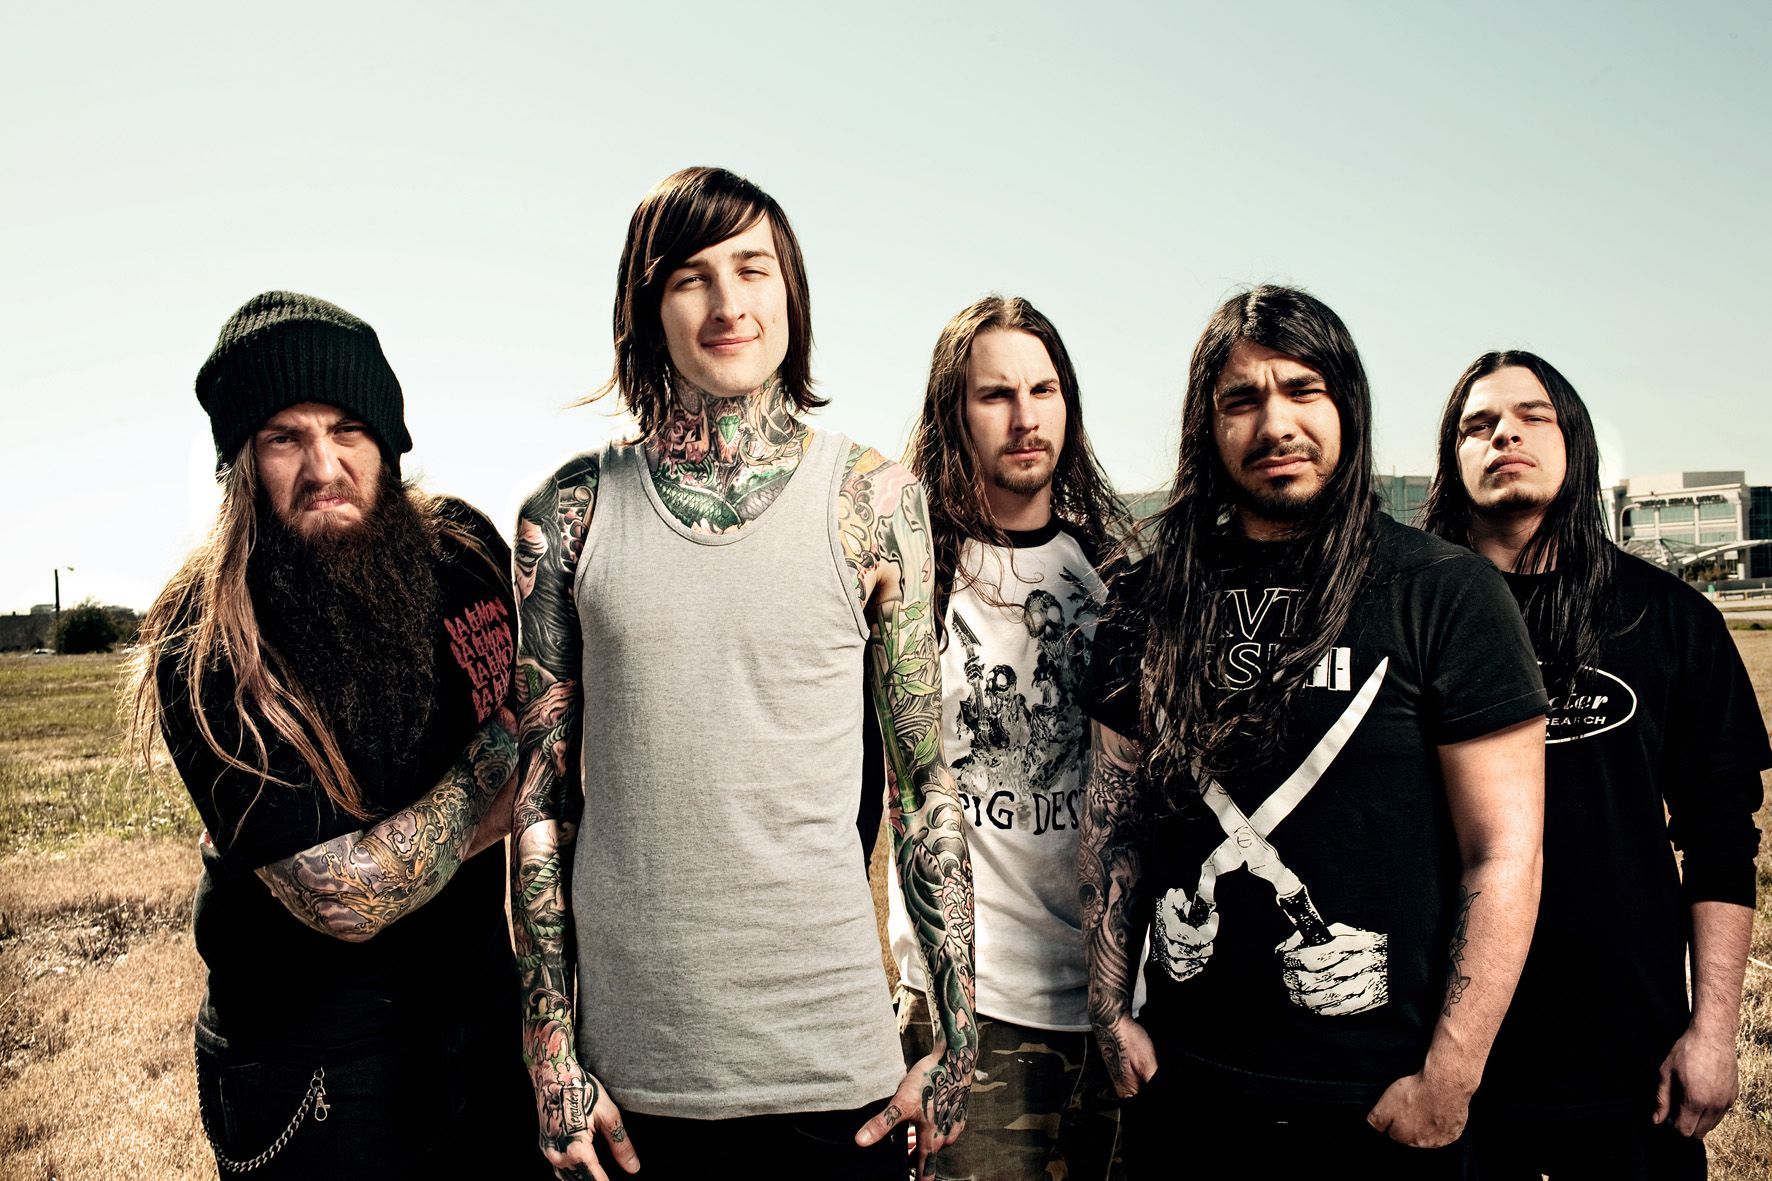 1772x1031px Suicide Silence 571.9 KB #336236